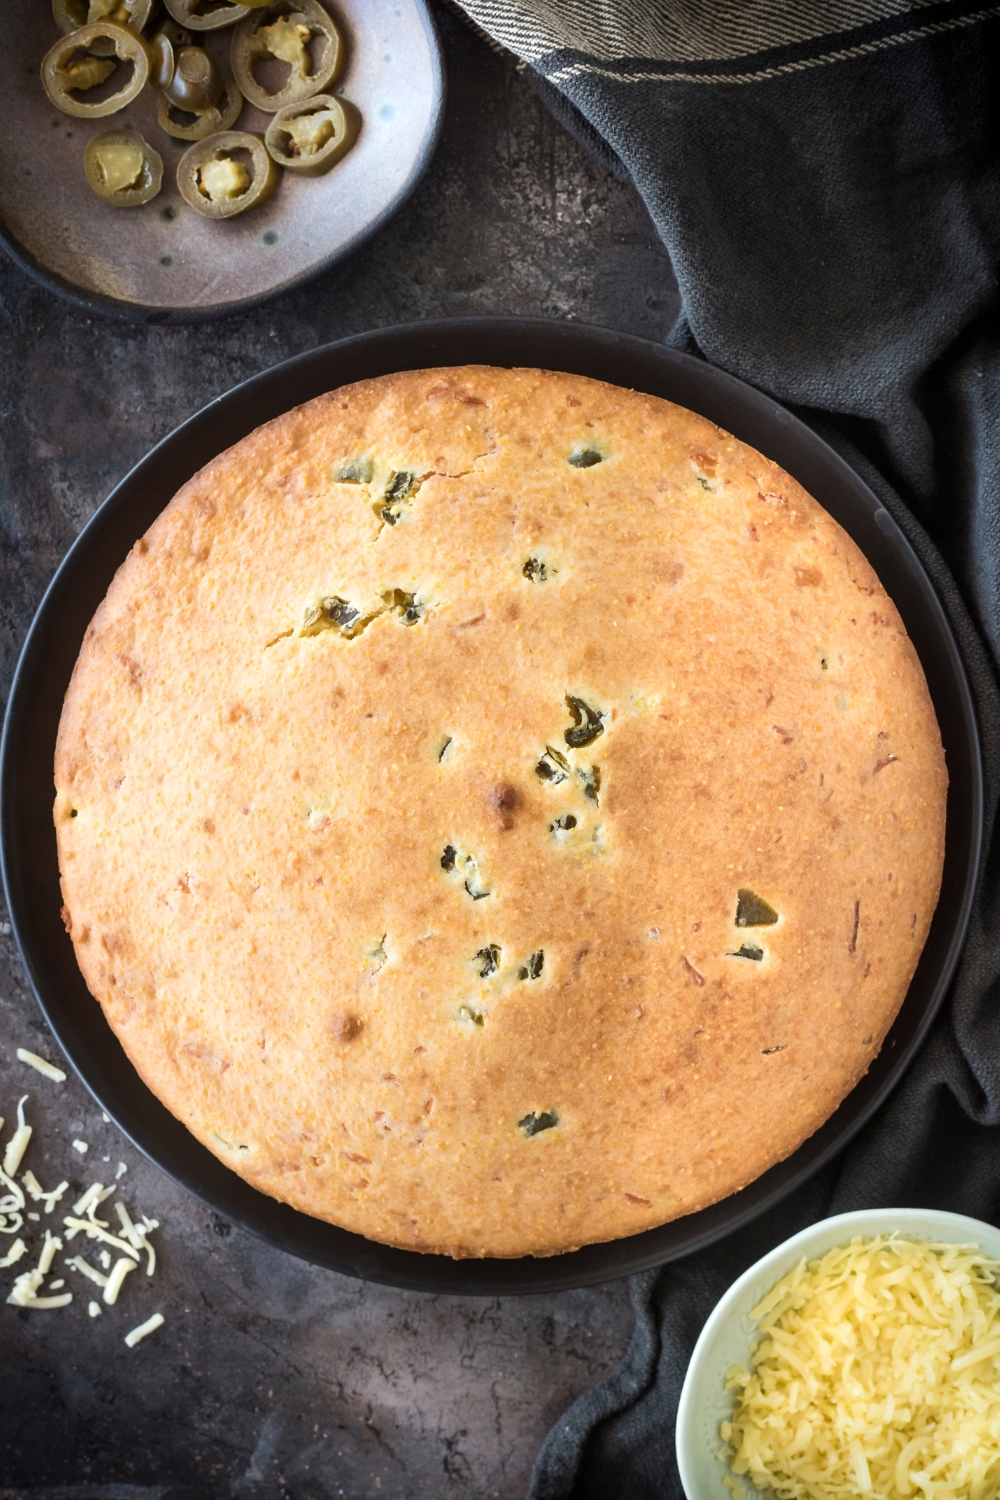 Top view of baked Jiffy jalapeno cornbread in a cake pan.